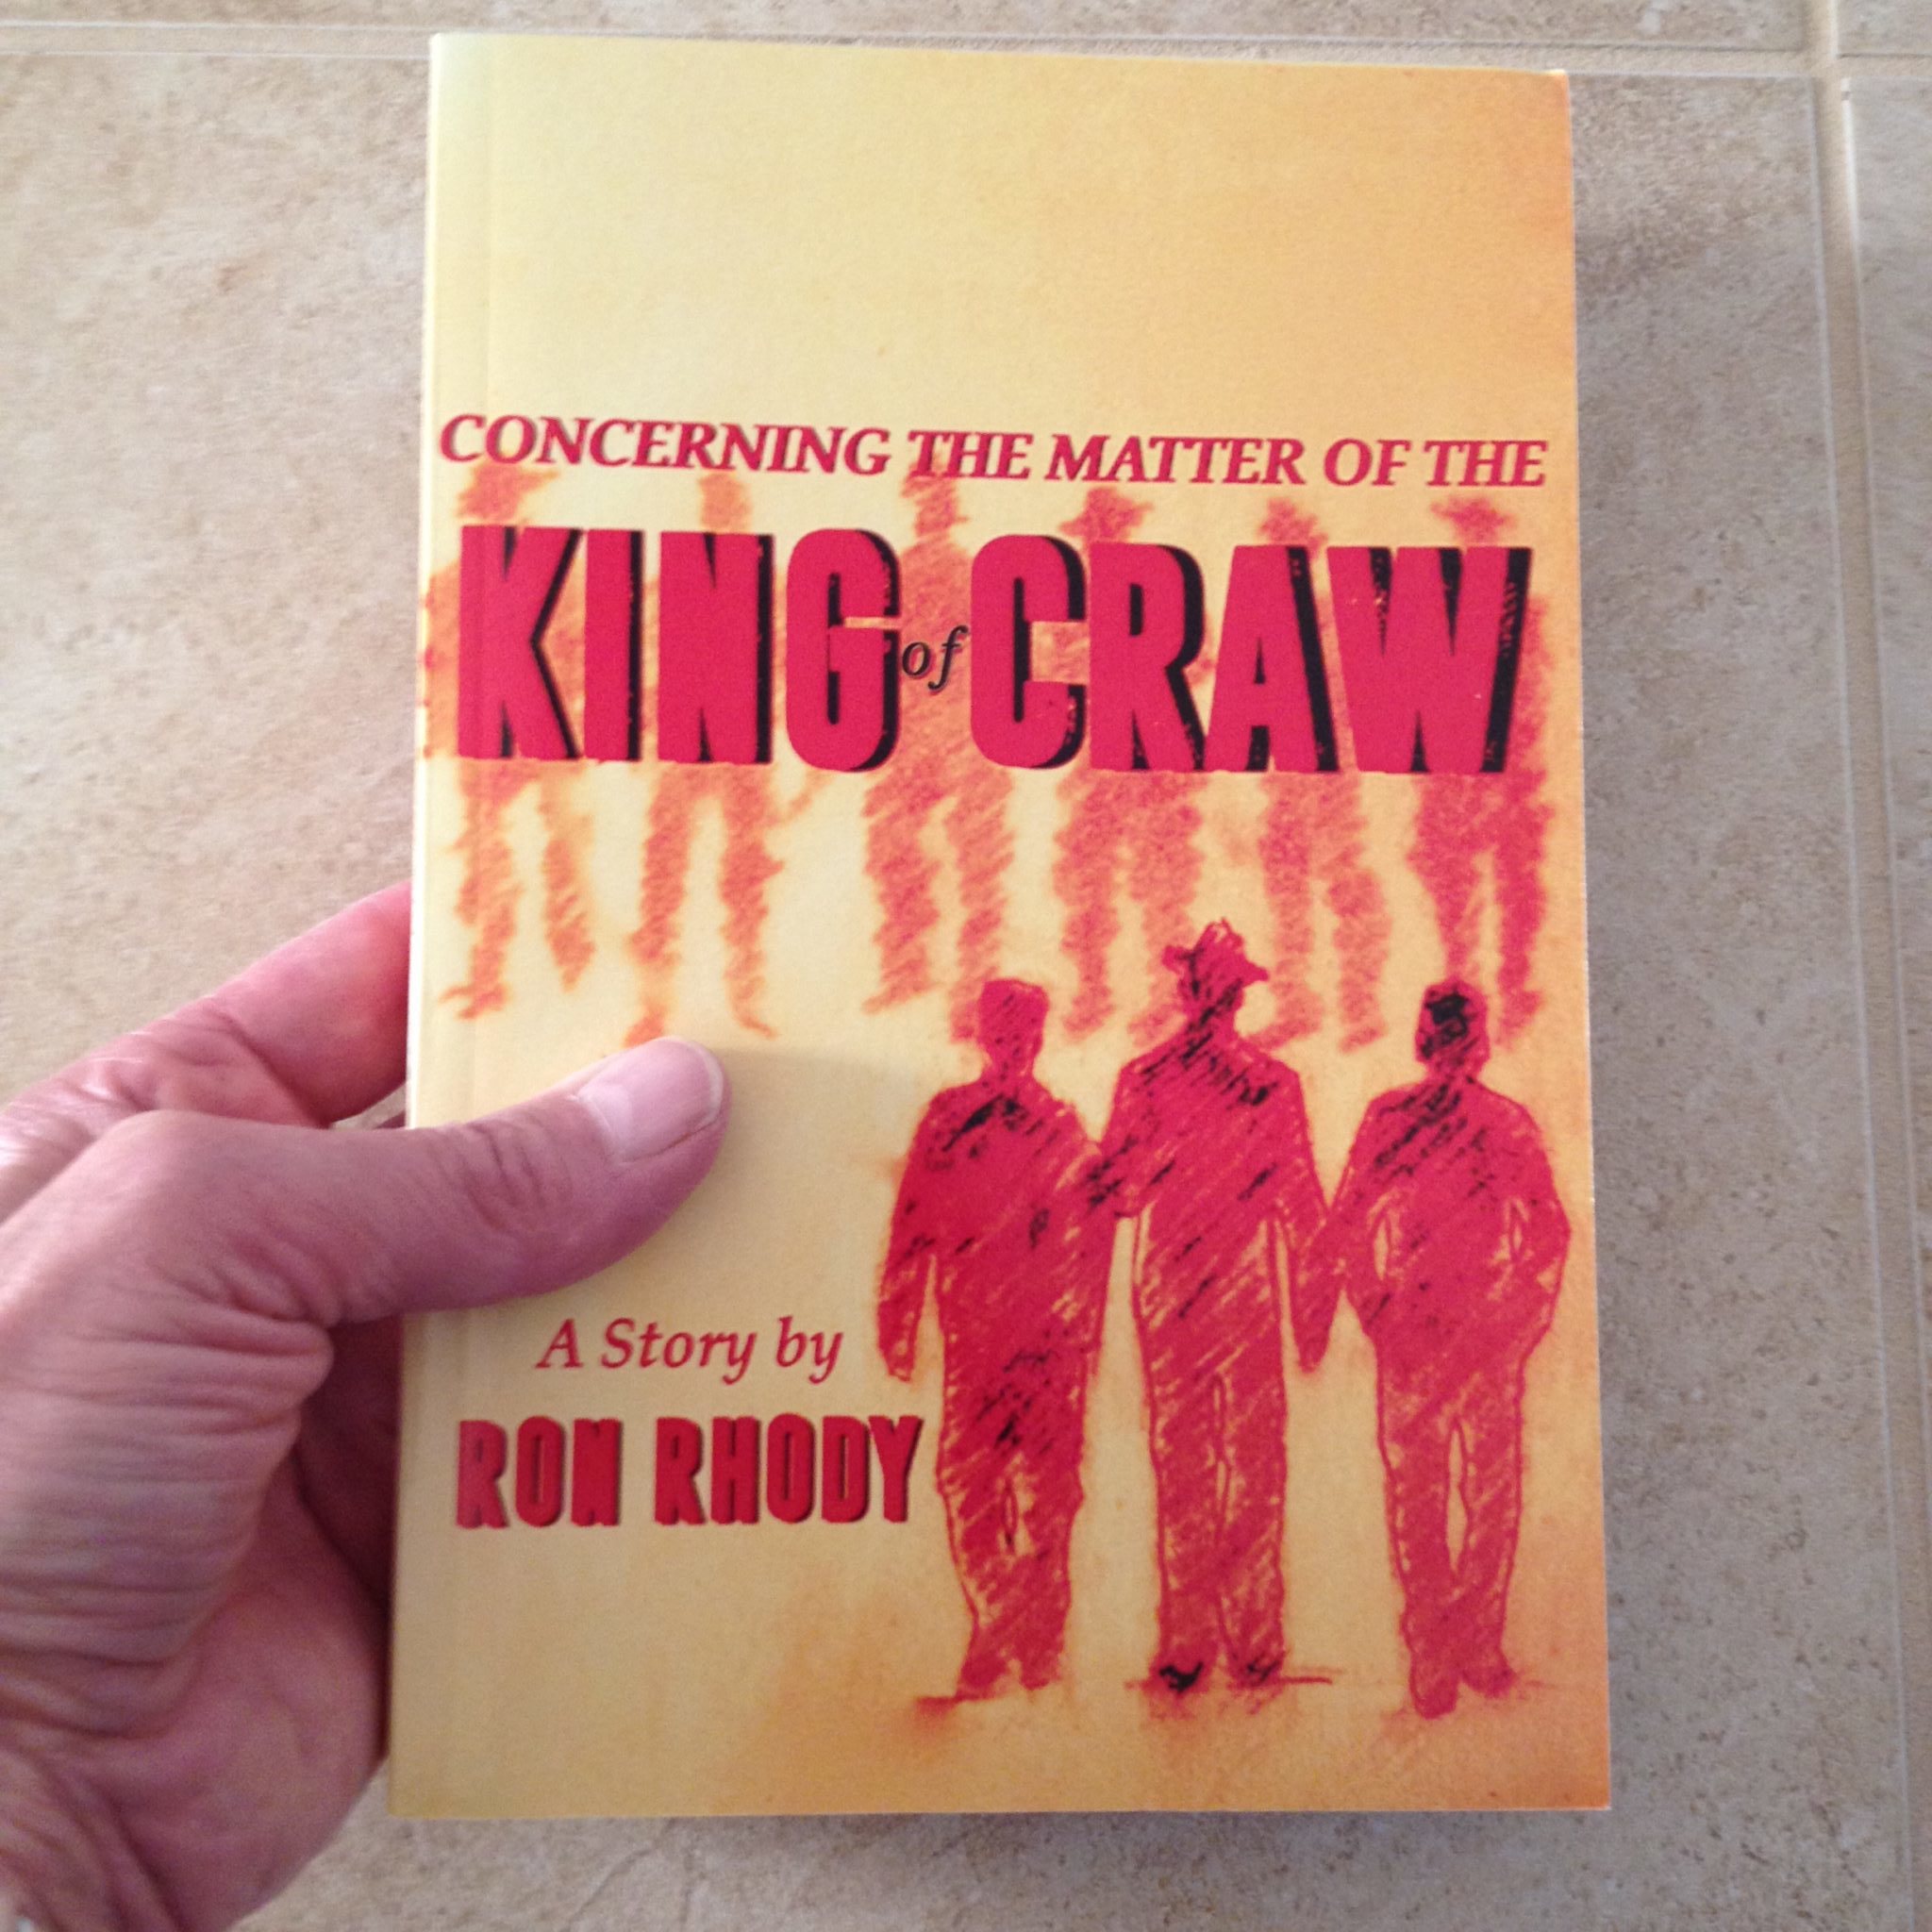 Ron Rhody, Concerning The Matter of The King of Craw